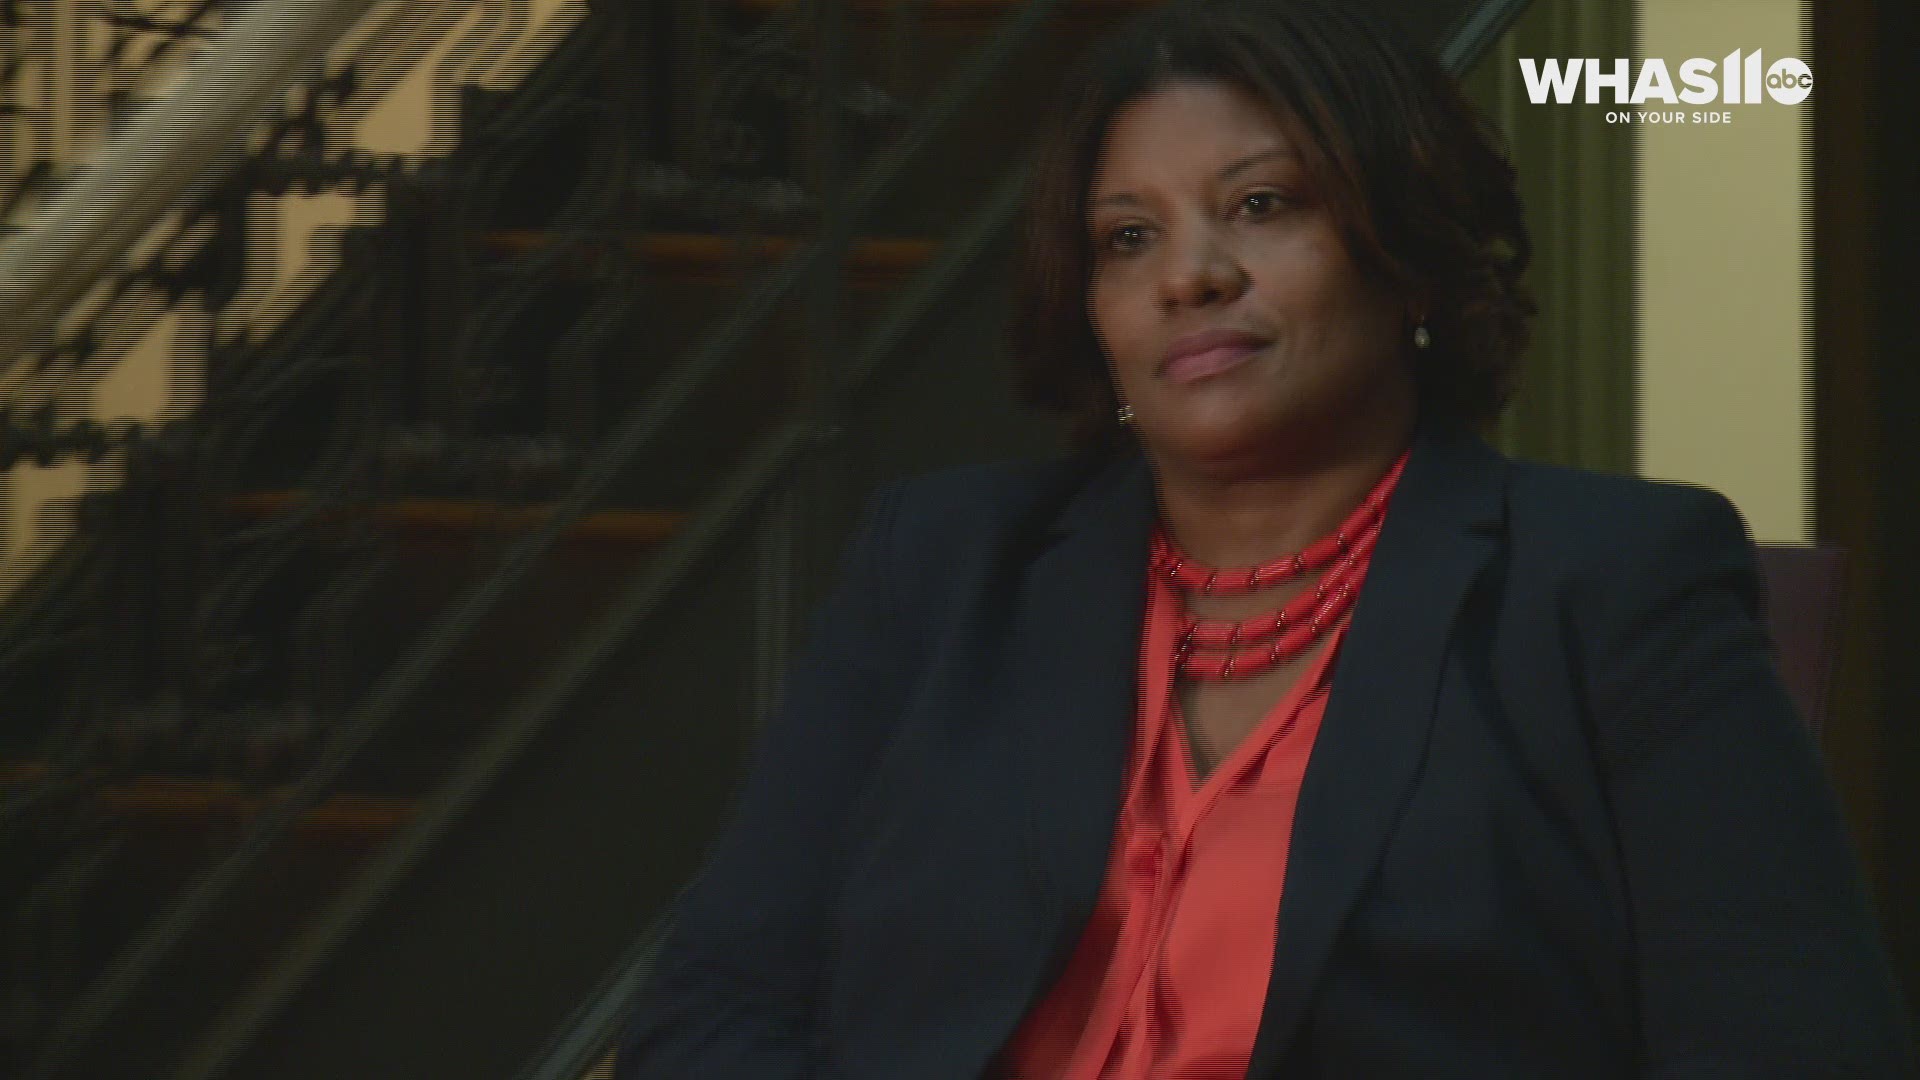 Yvette Gentry will be the third leader and first woman to lead the department in six months after interim Chief Rob Schroeder announced his retirement.